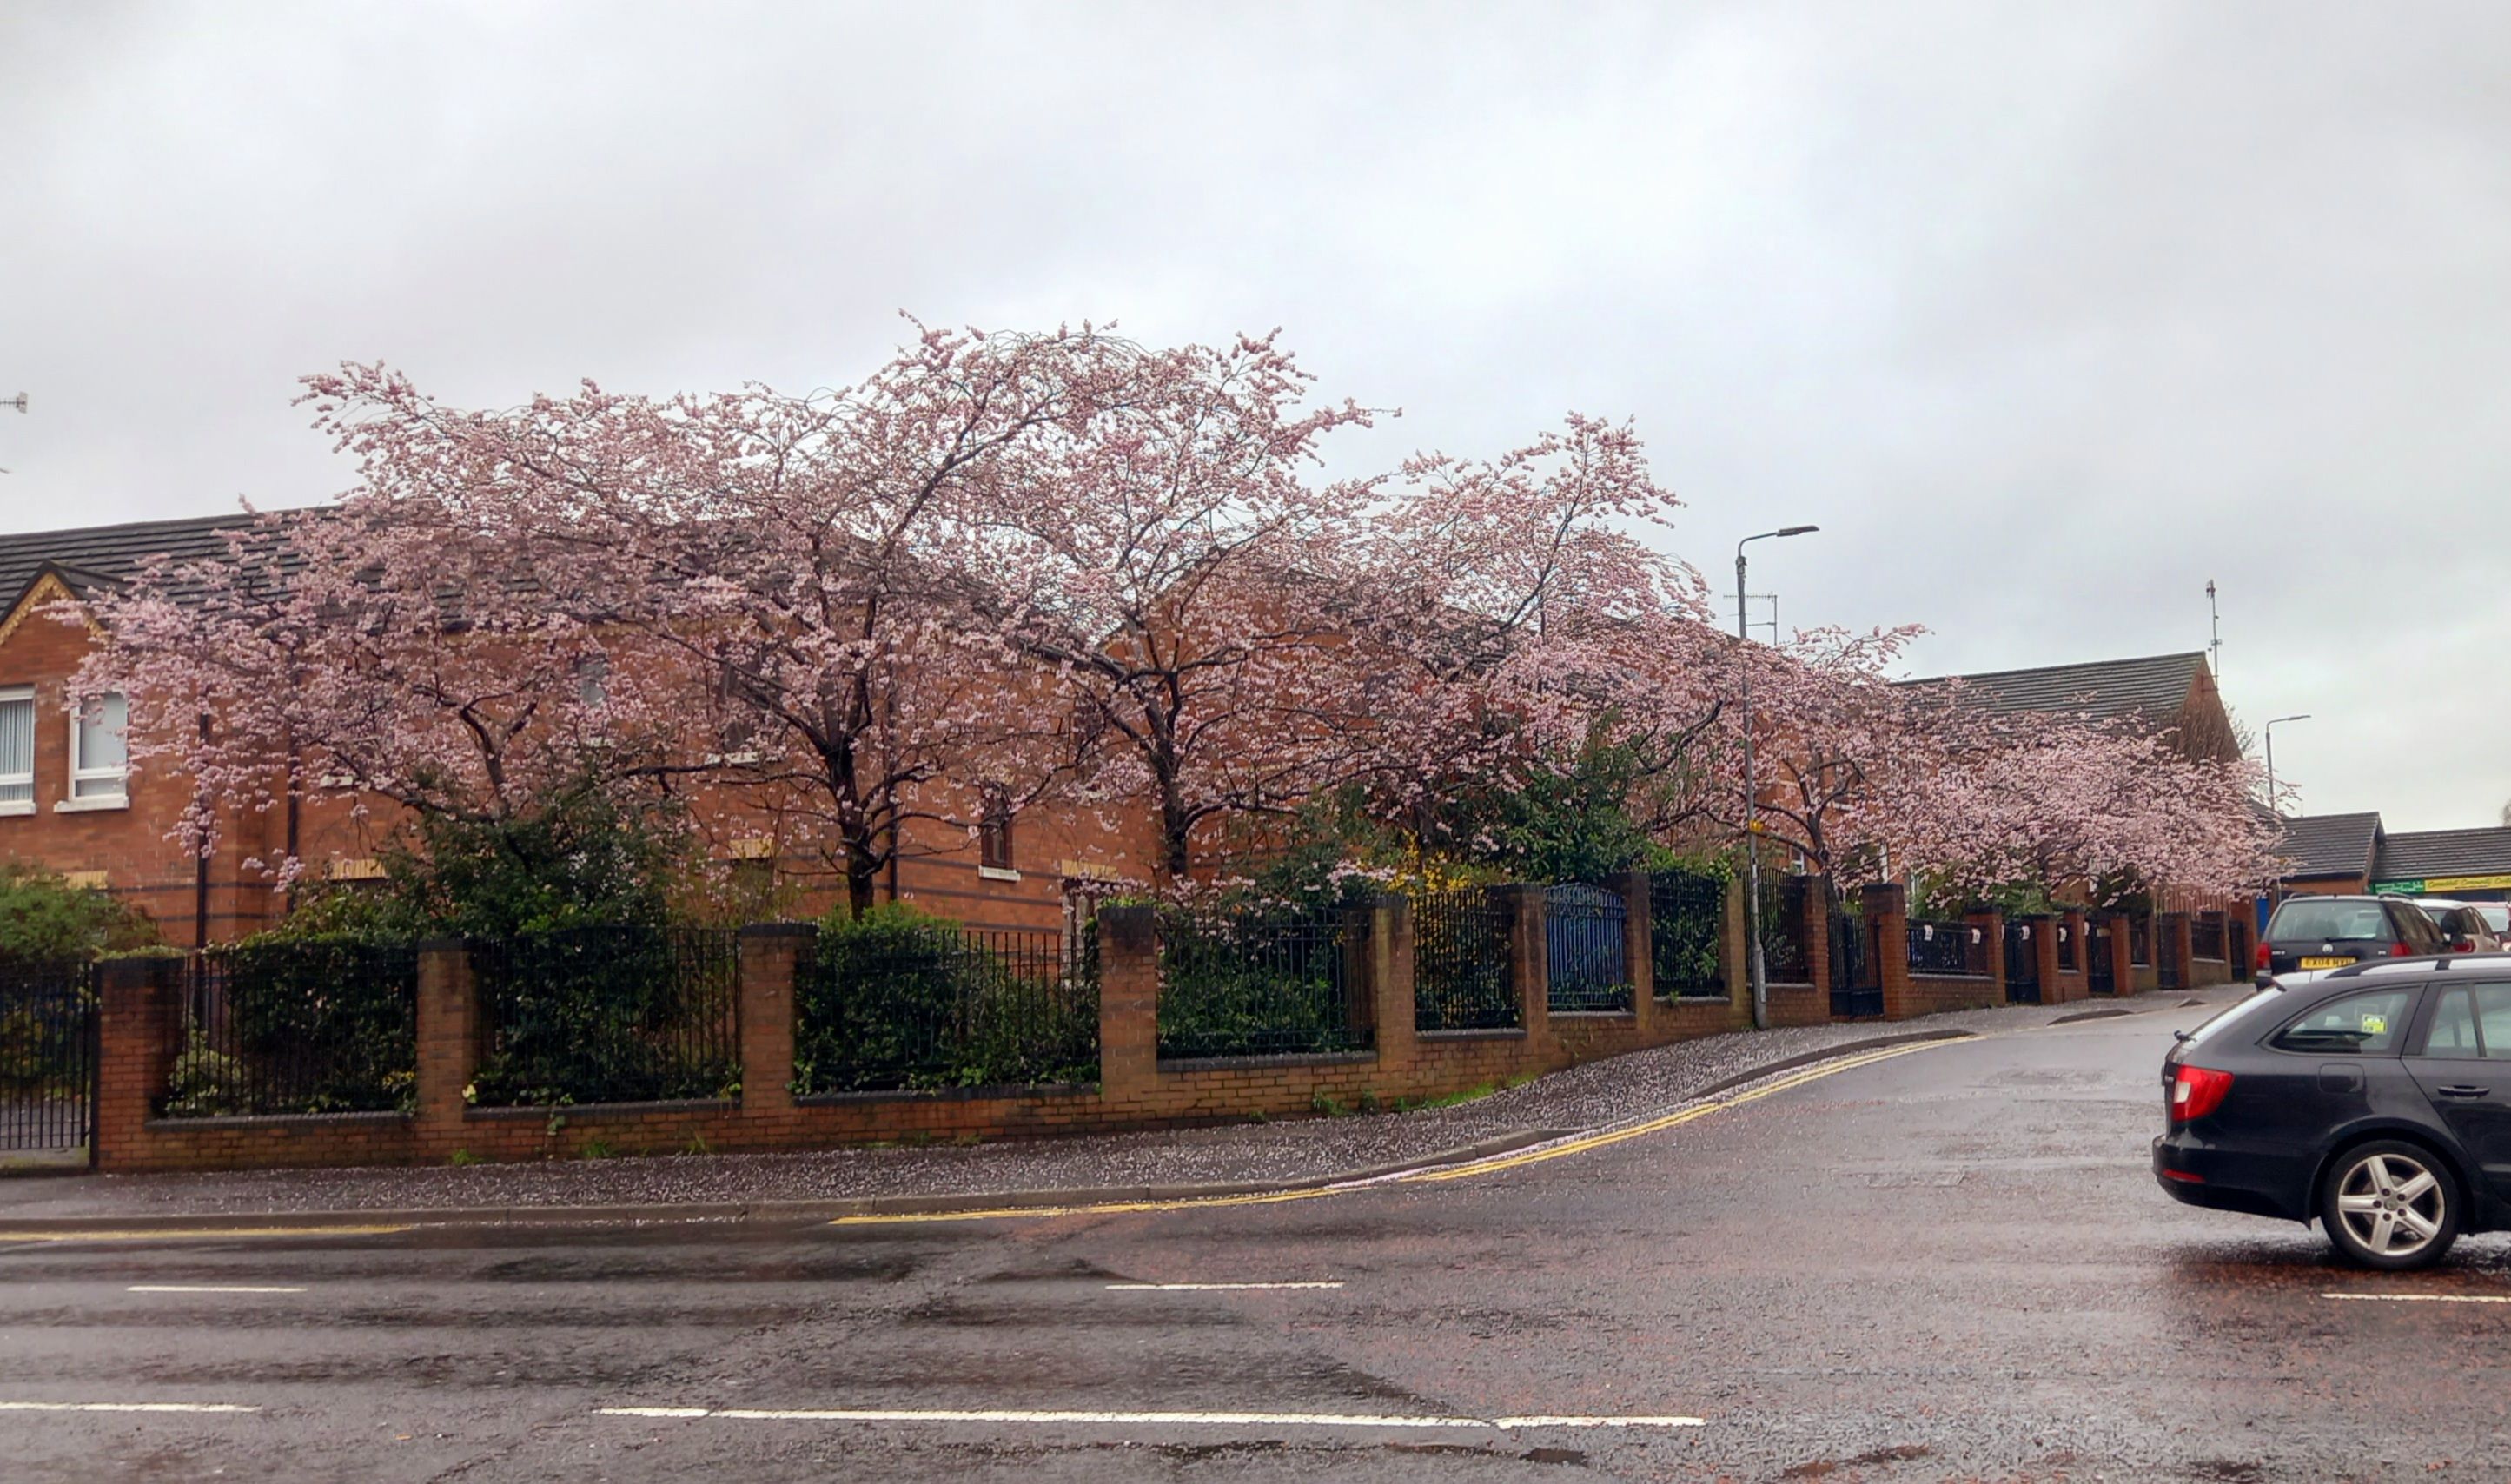 PRETTY IN PINK: Lower Regent Street in the Carrick Hill district